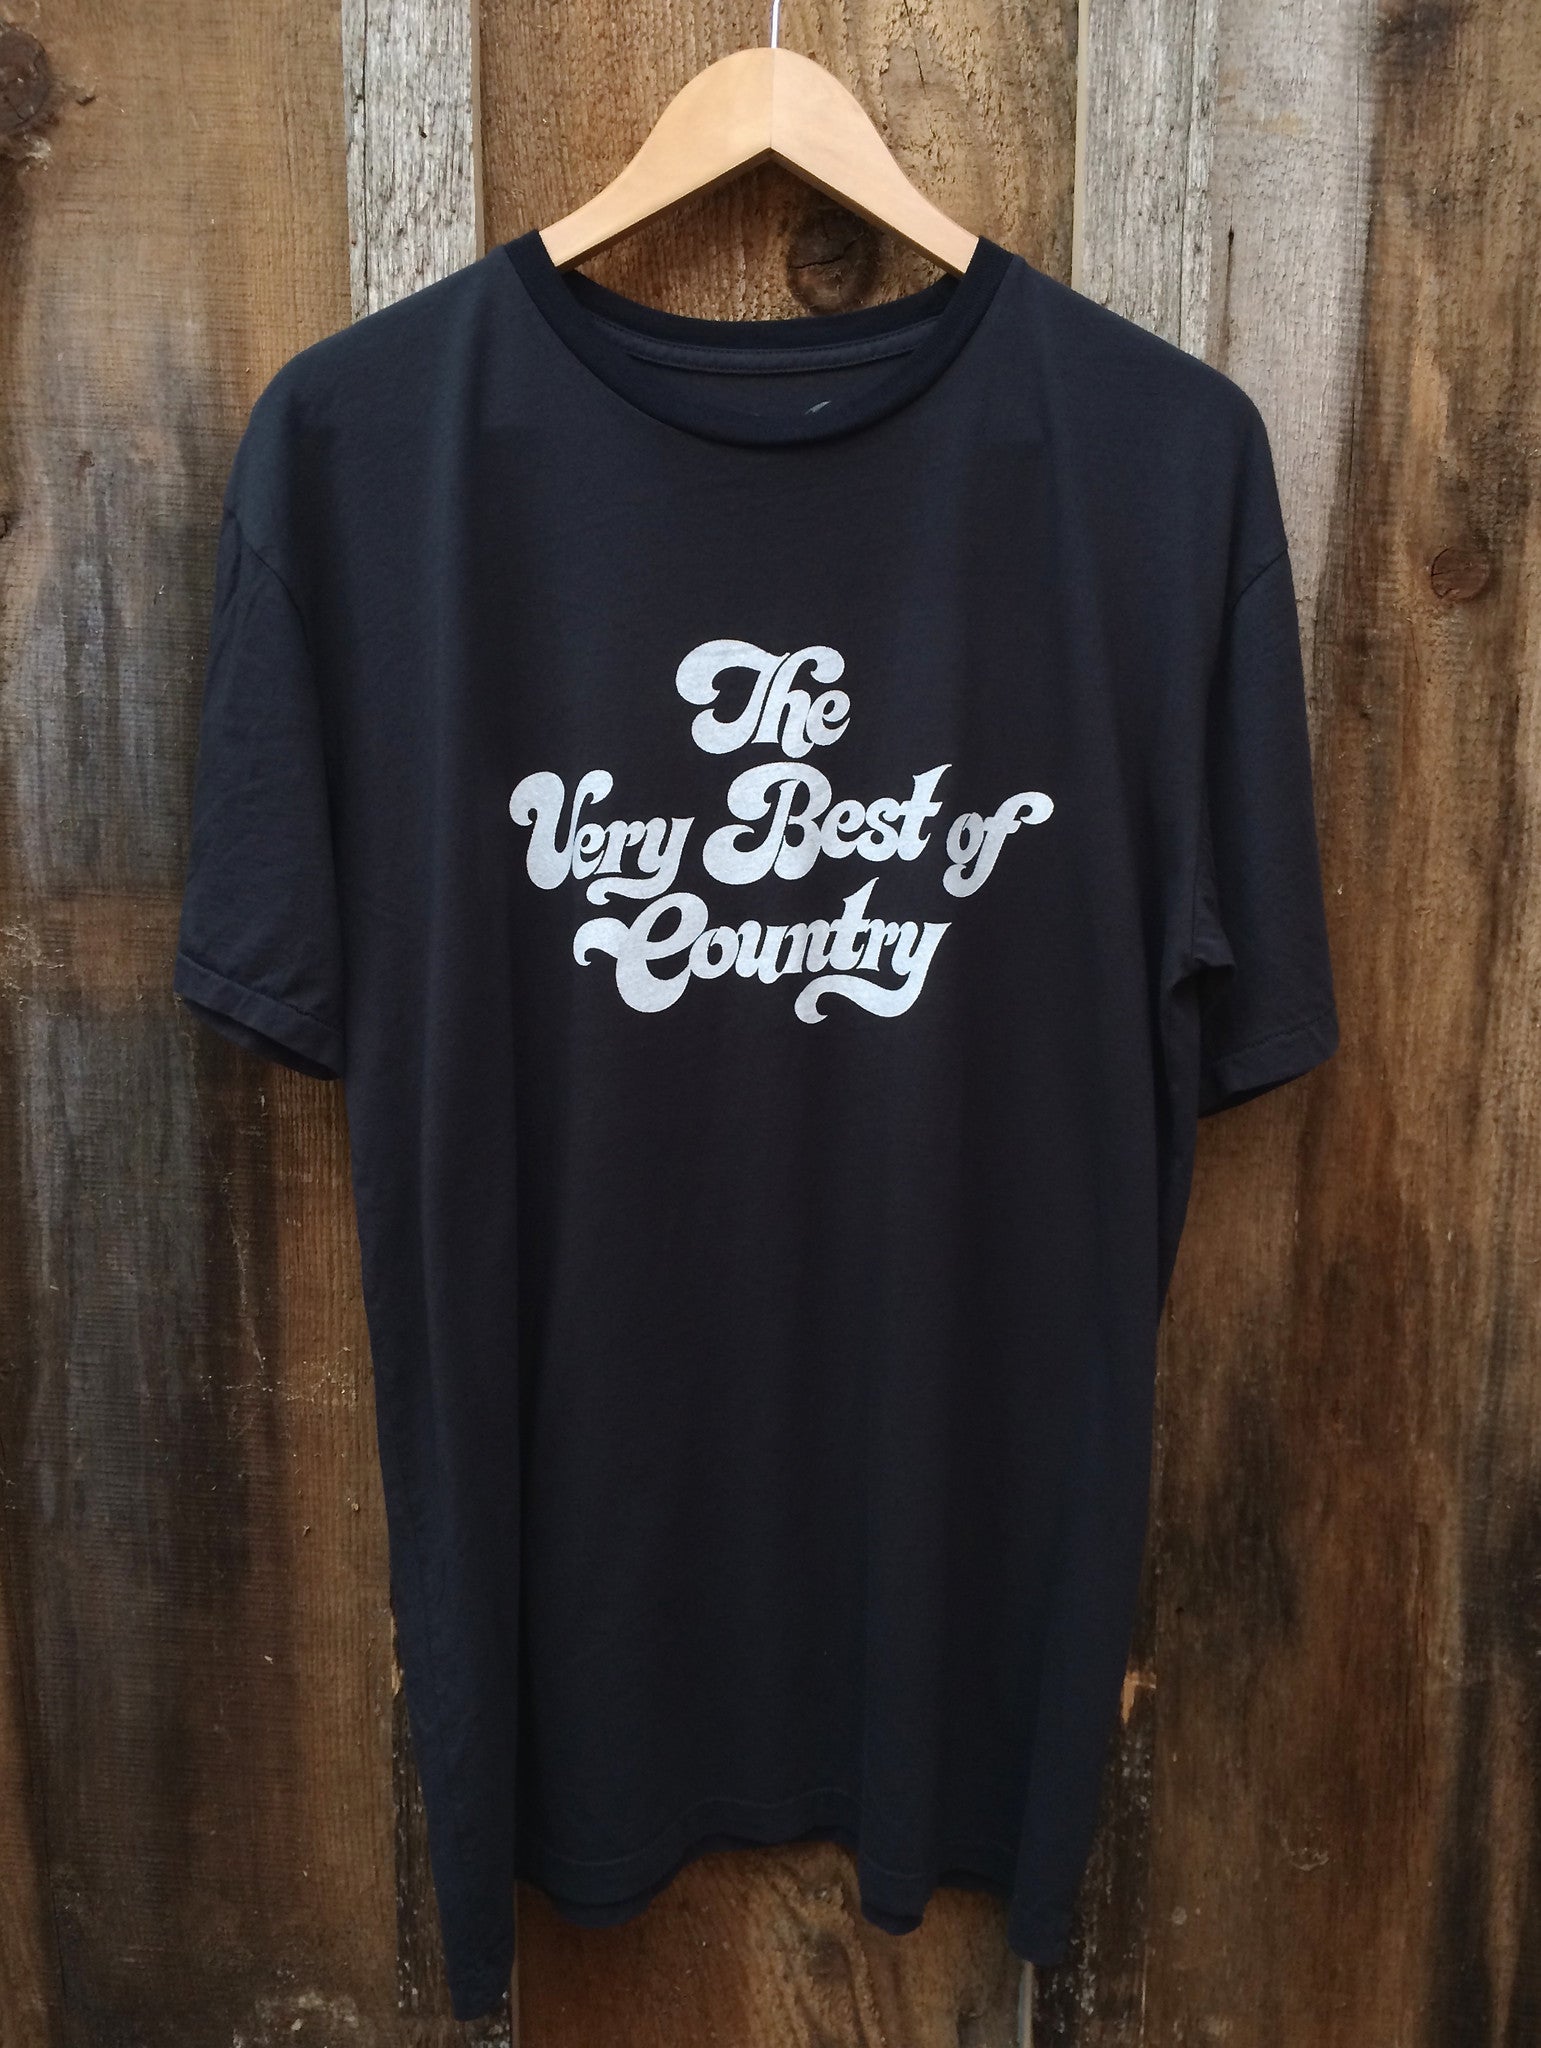 Very Best of Country Mens Tee Blk/Wht